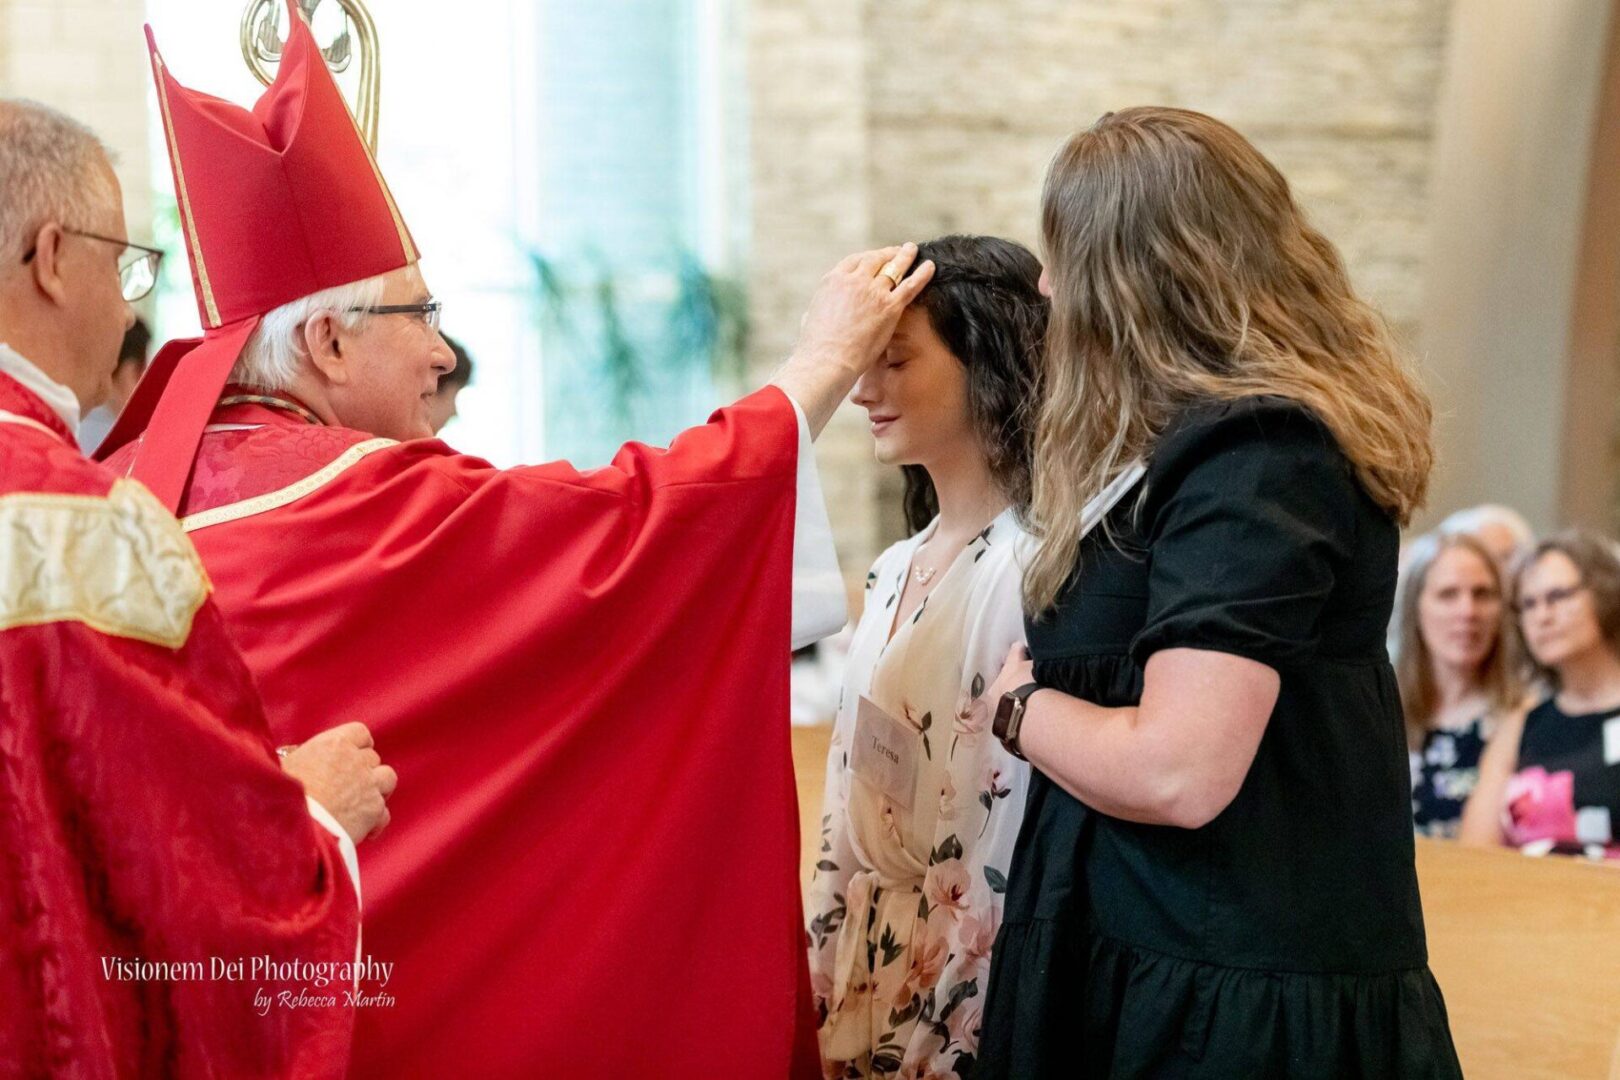 A woman is getting her hair combed by an archbishop.